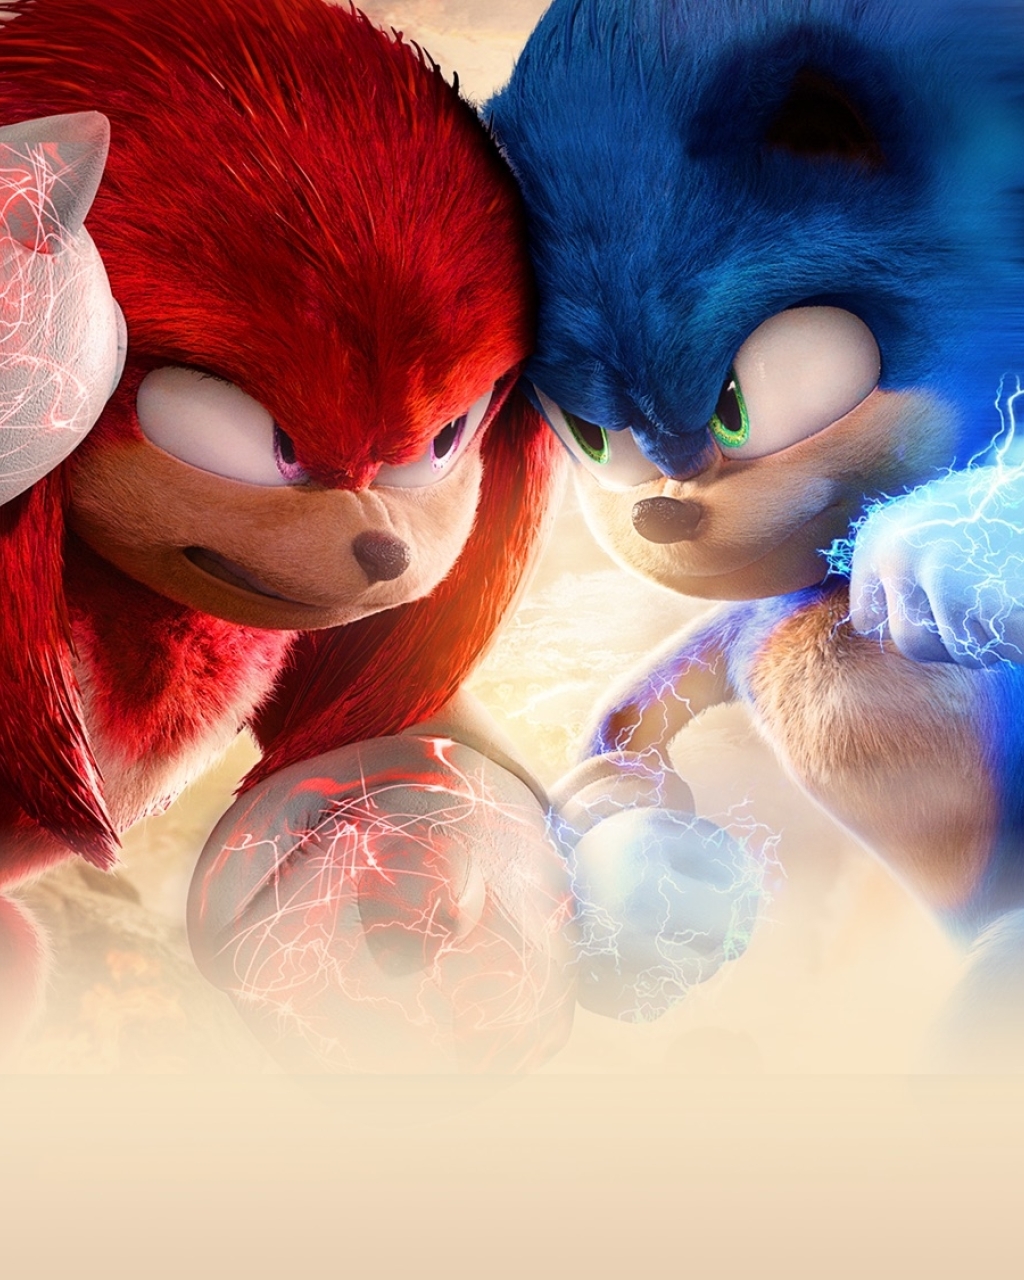 1024x1280 Resolution Sonic the Hedgehog vs Knuckles the Echidna ...